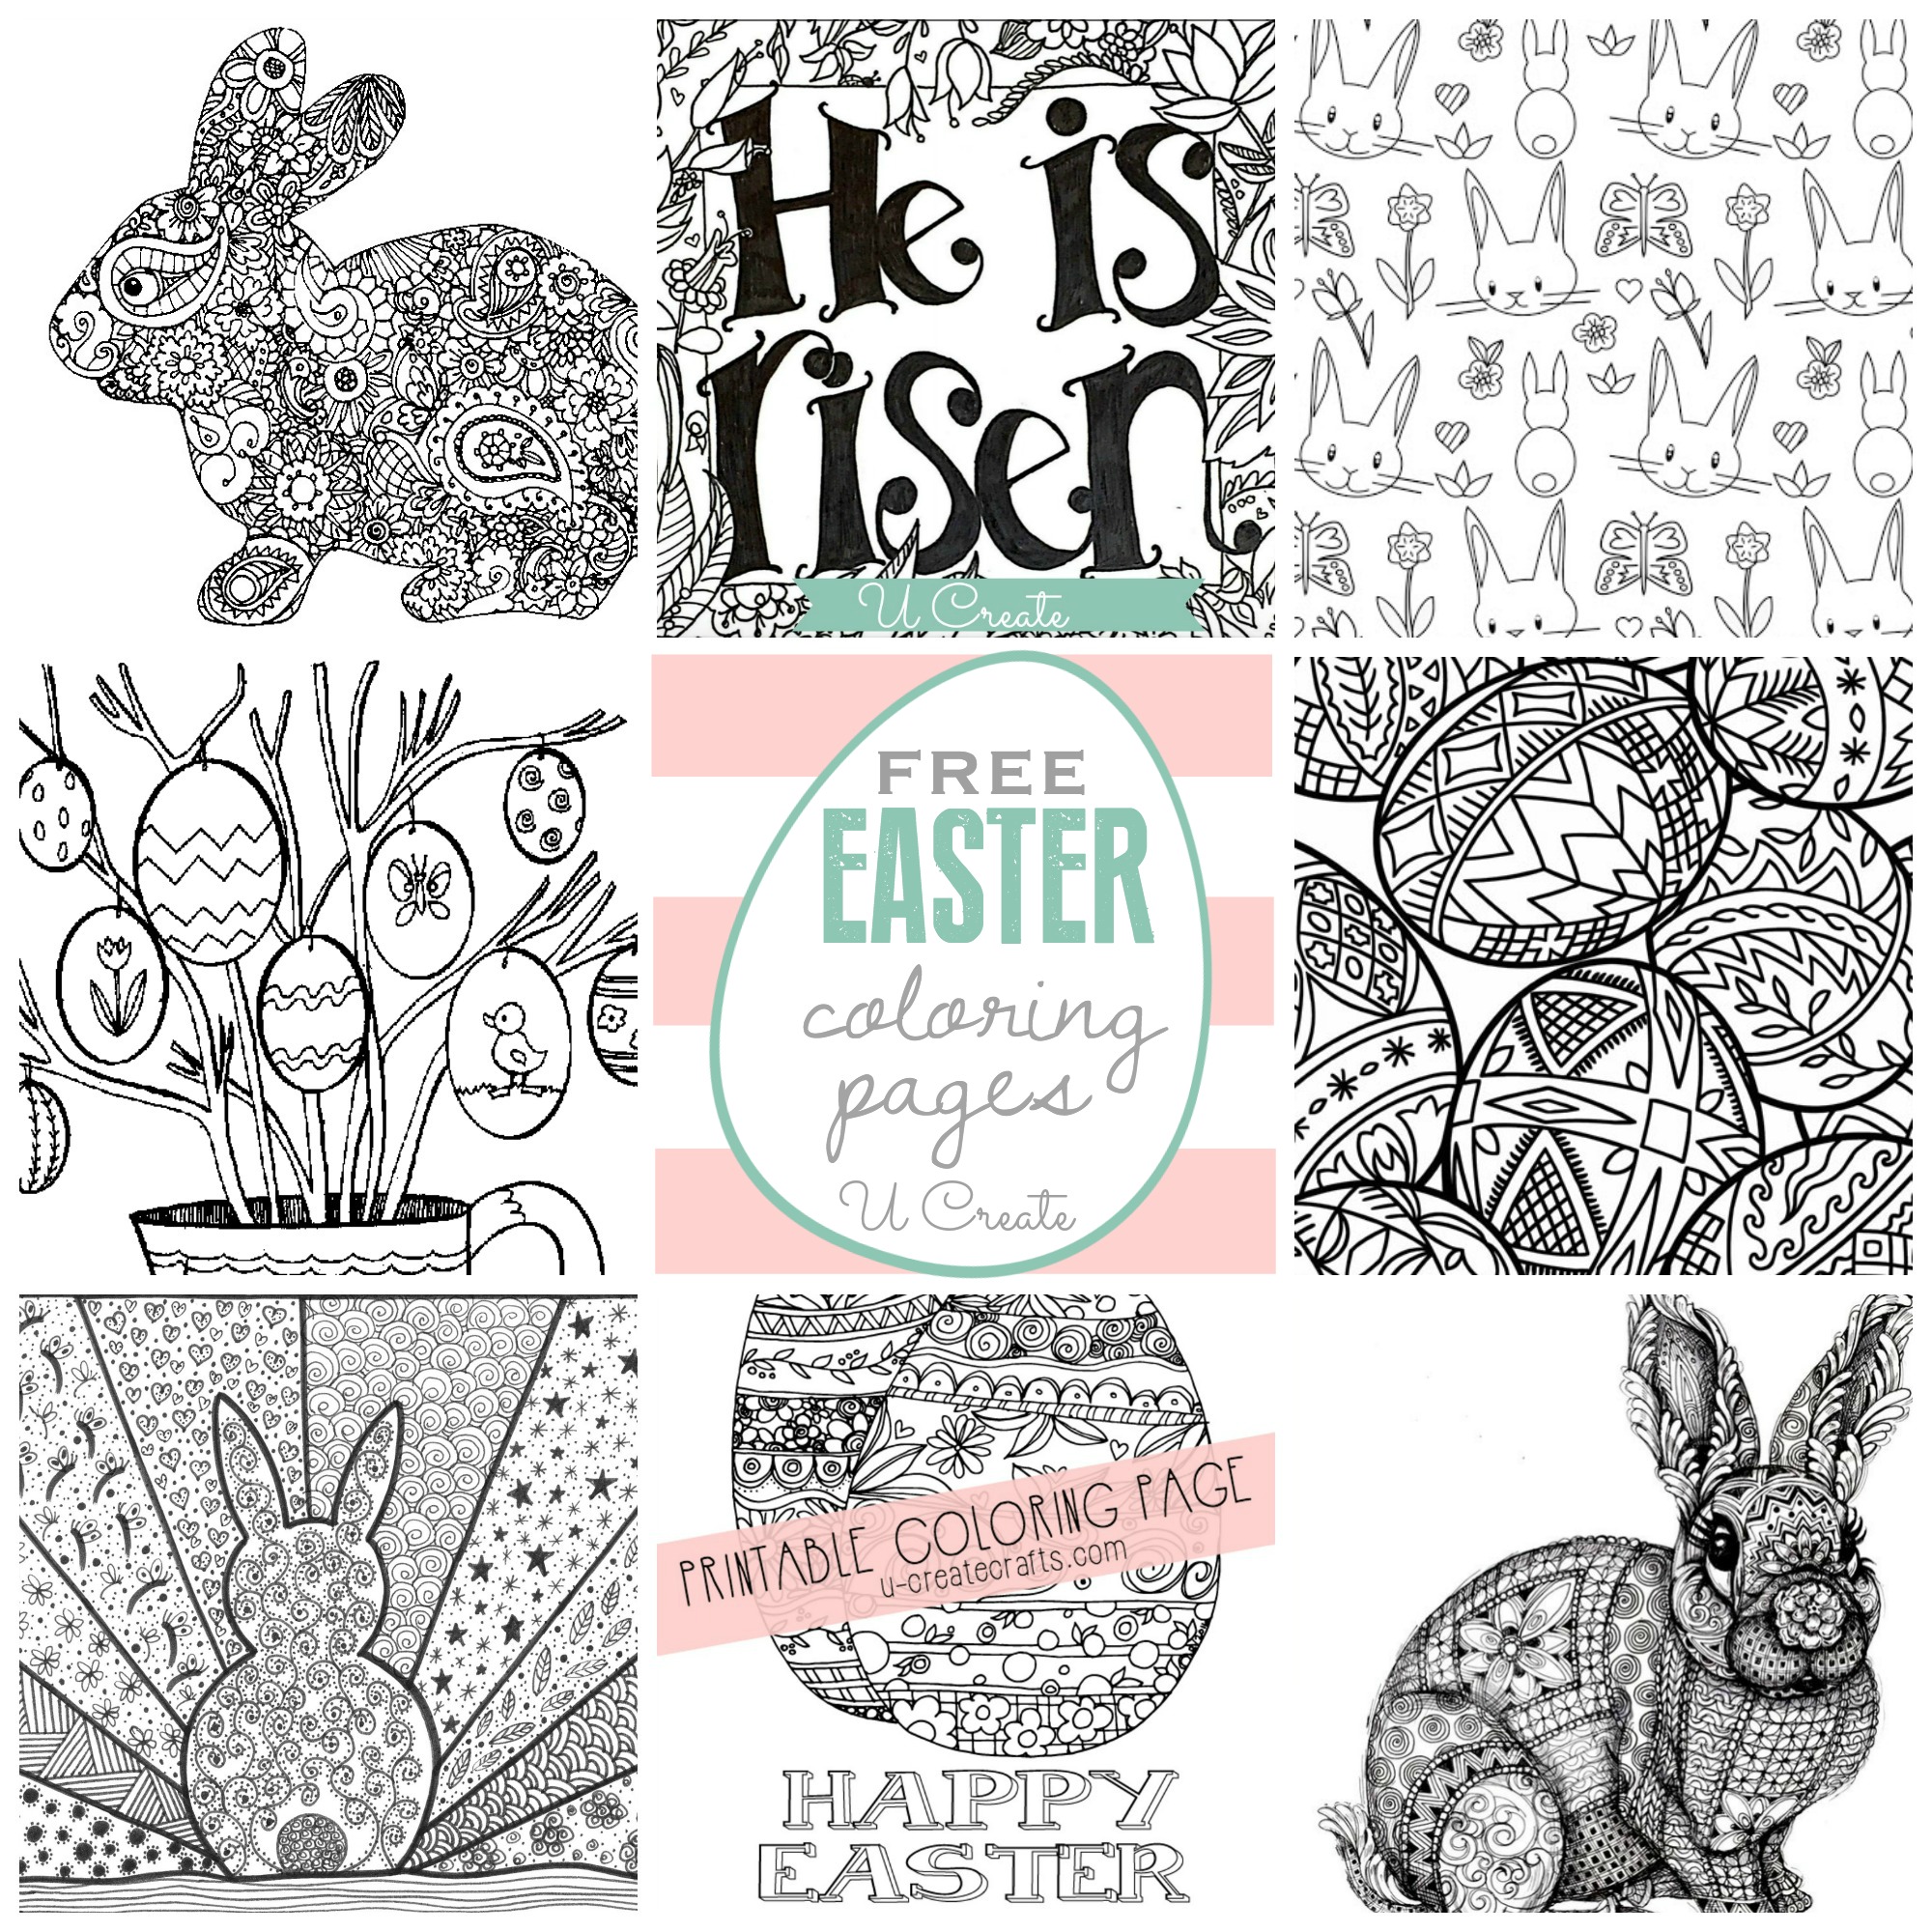 Free Easter Coloring Pages - U Create